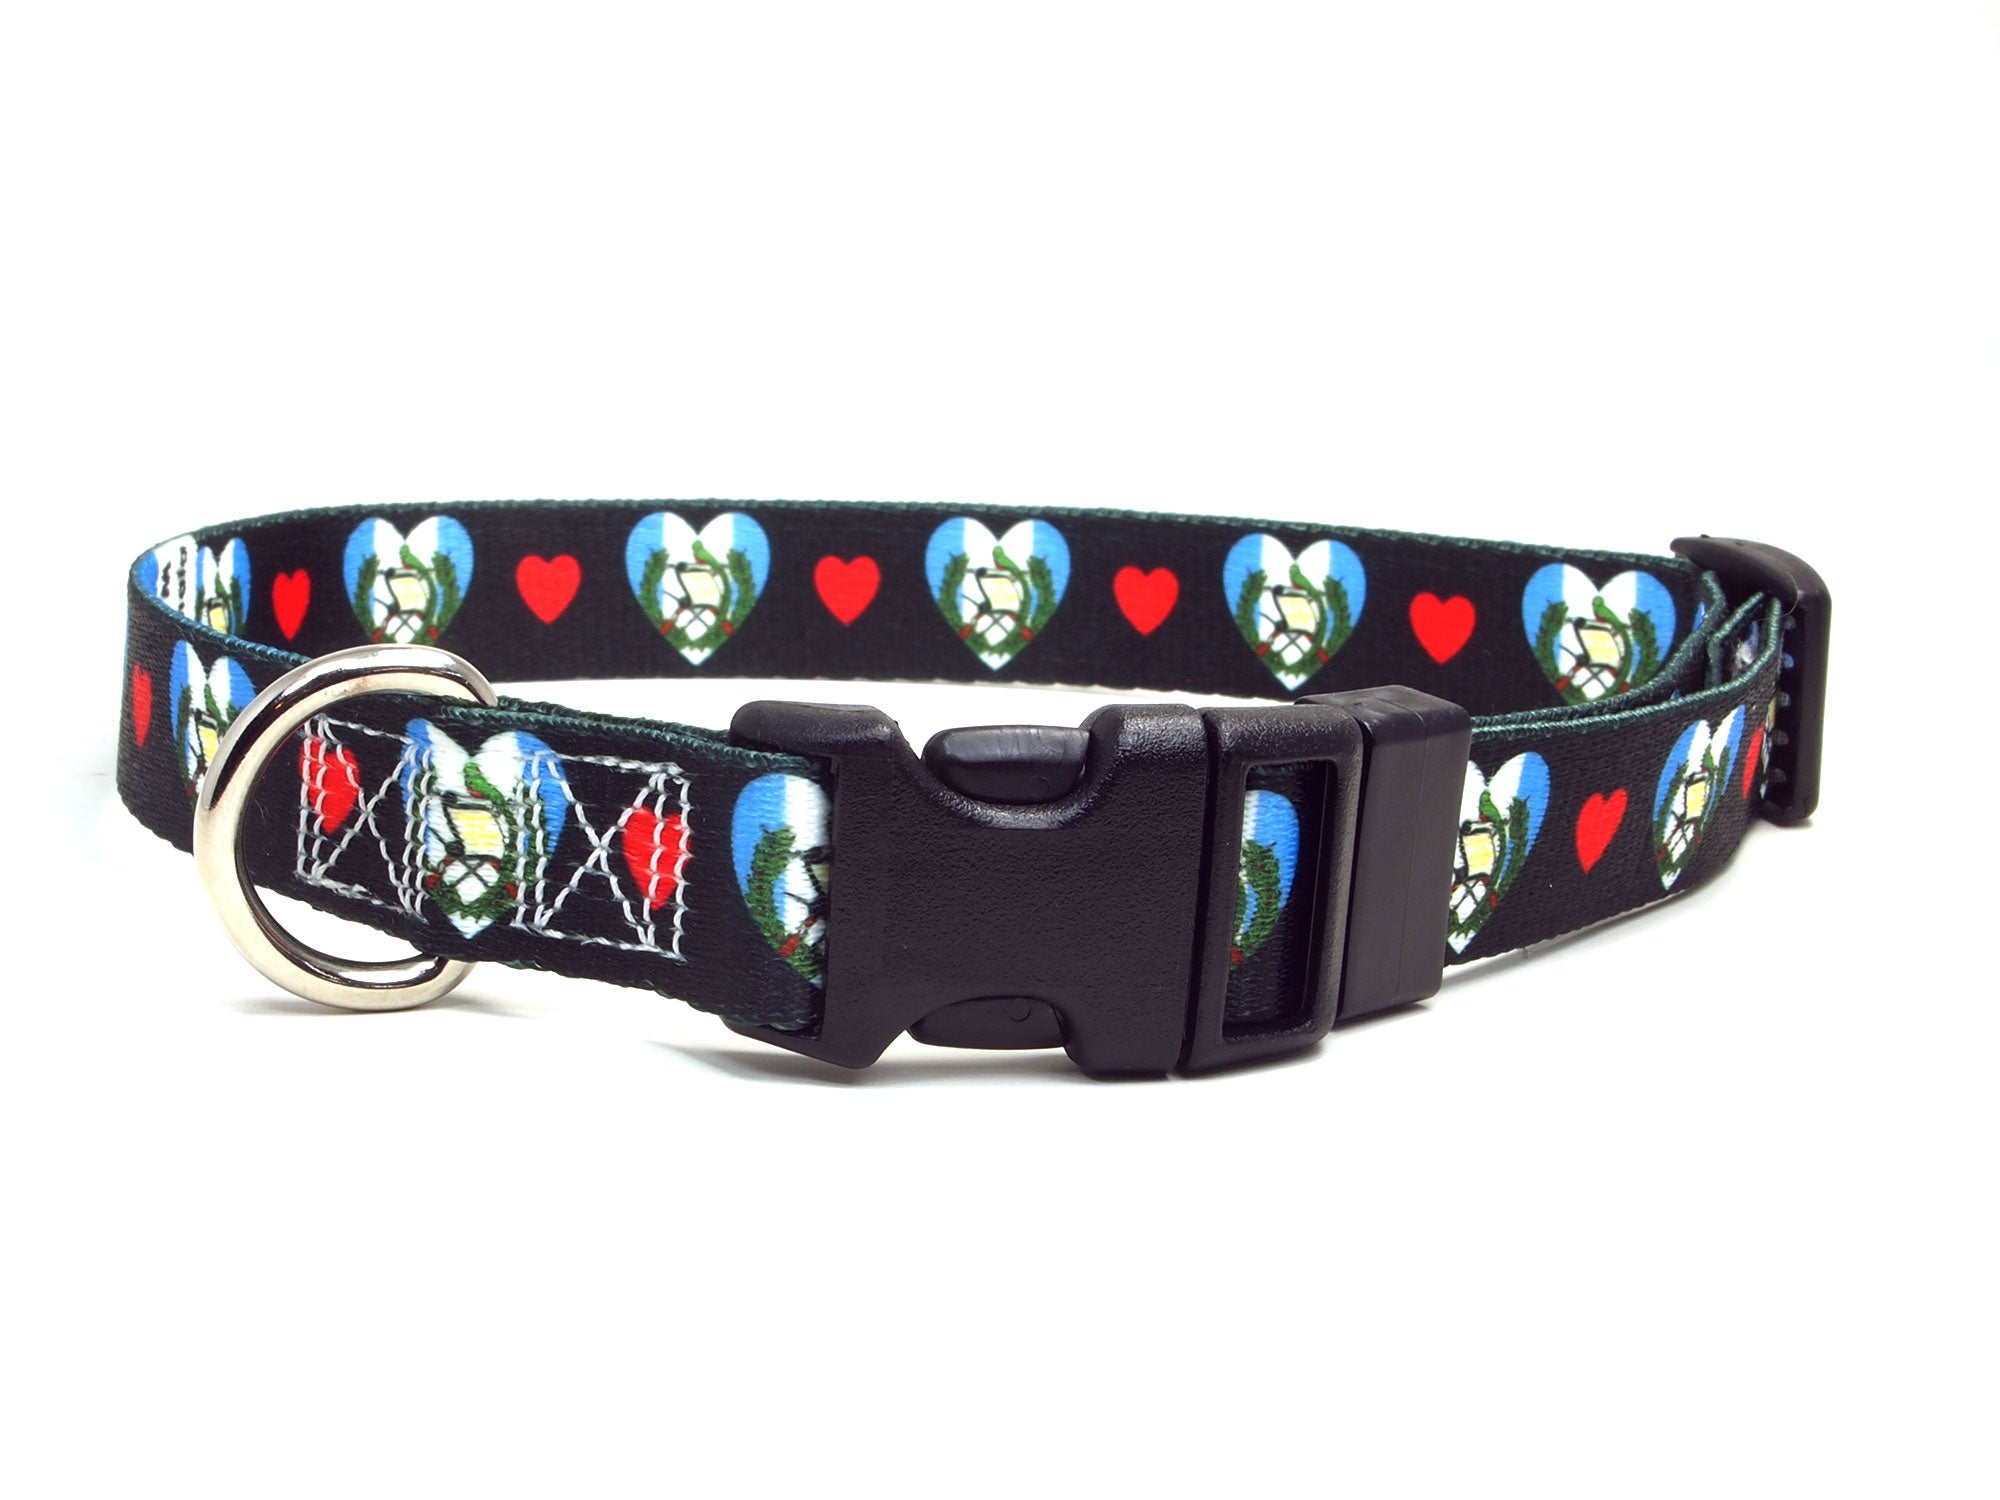 Dog Collar with Guatemala Hearts Pattern in Black